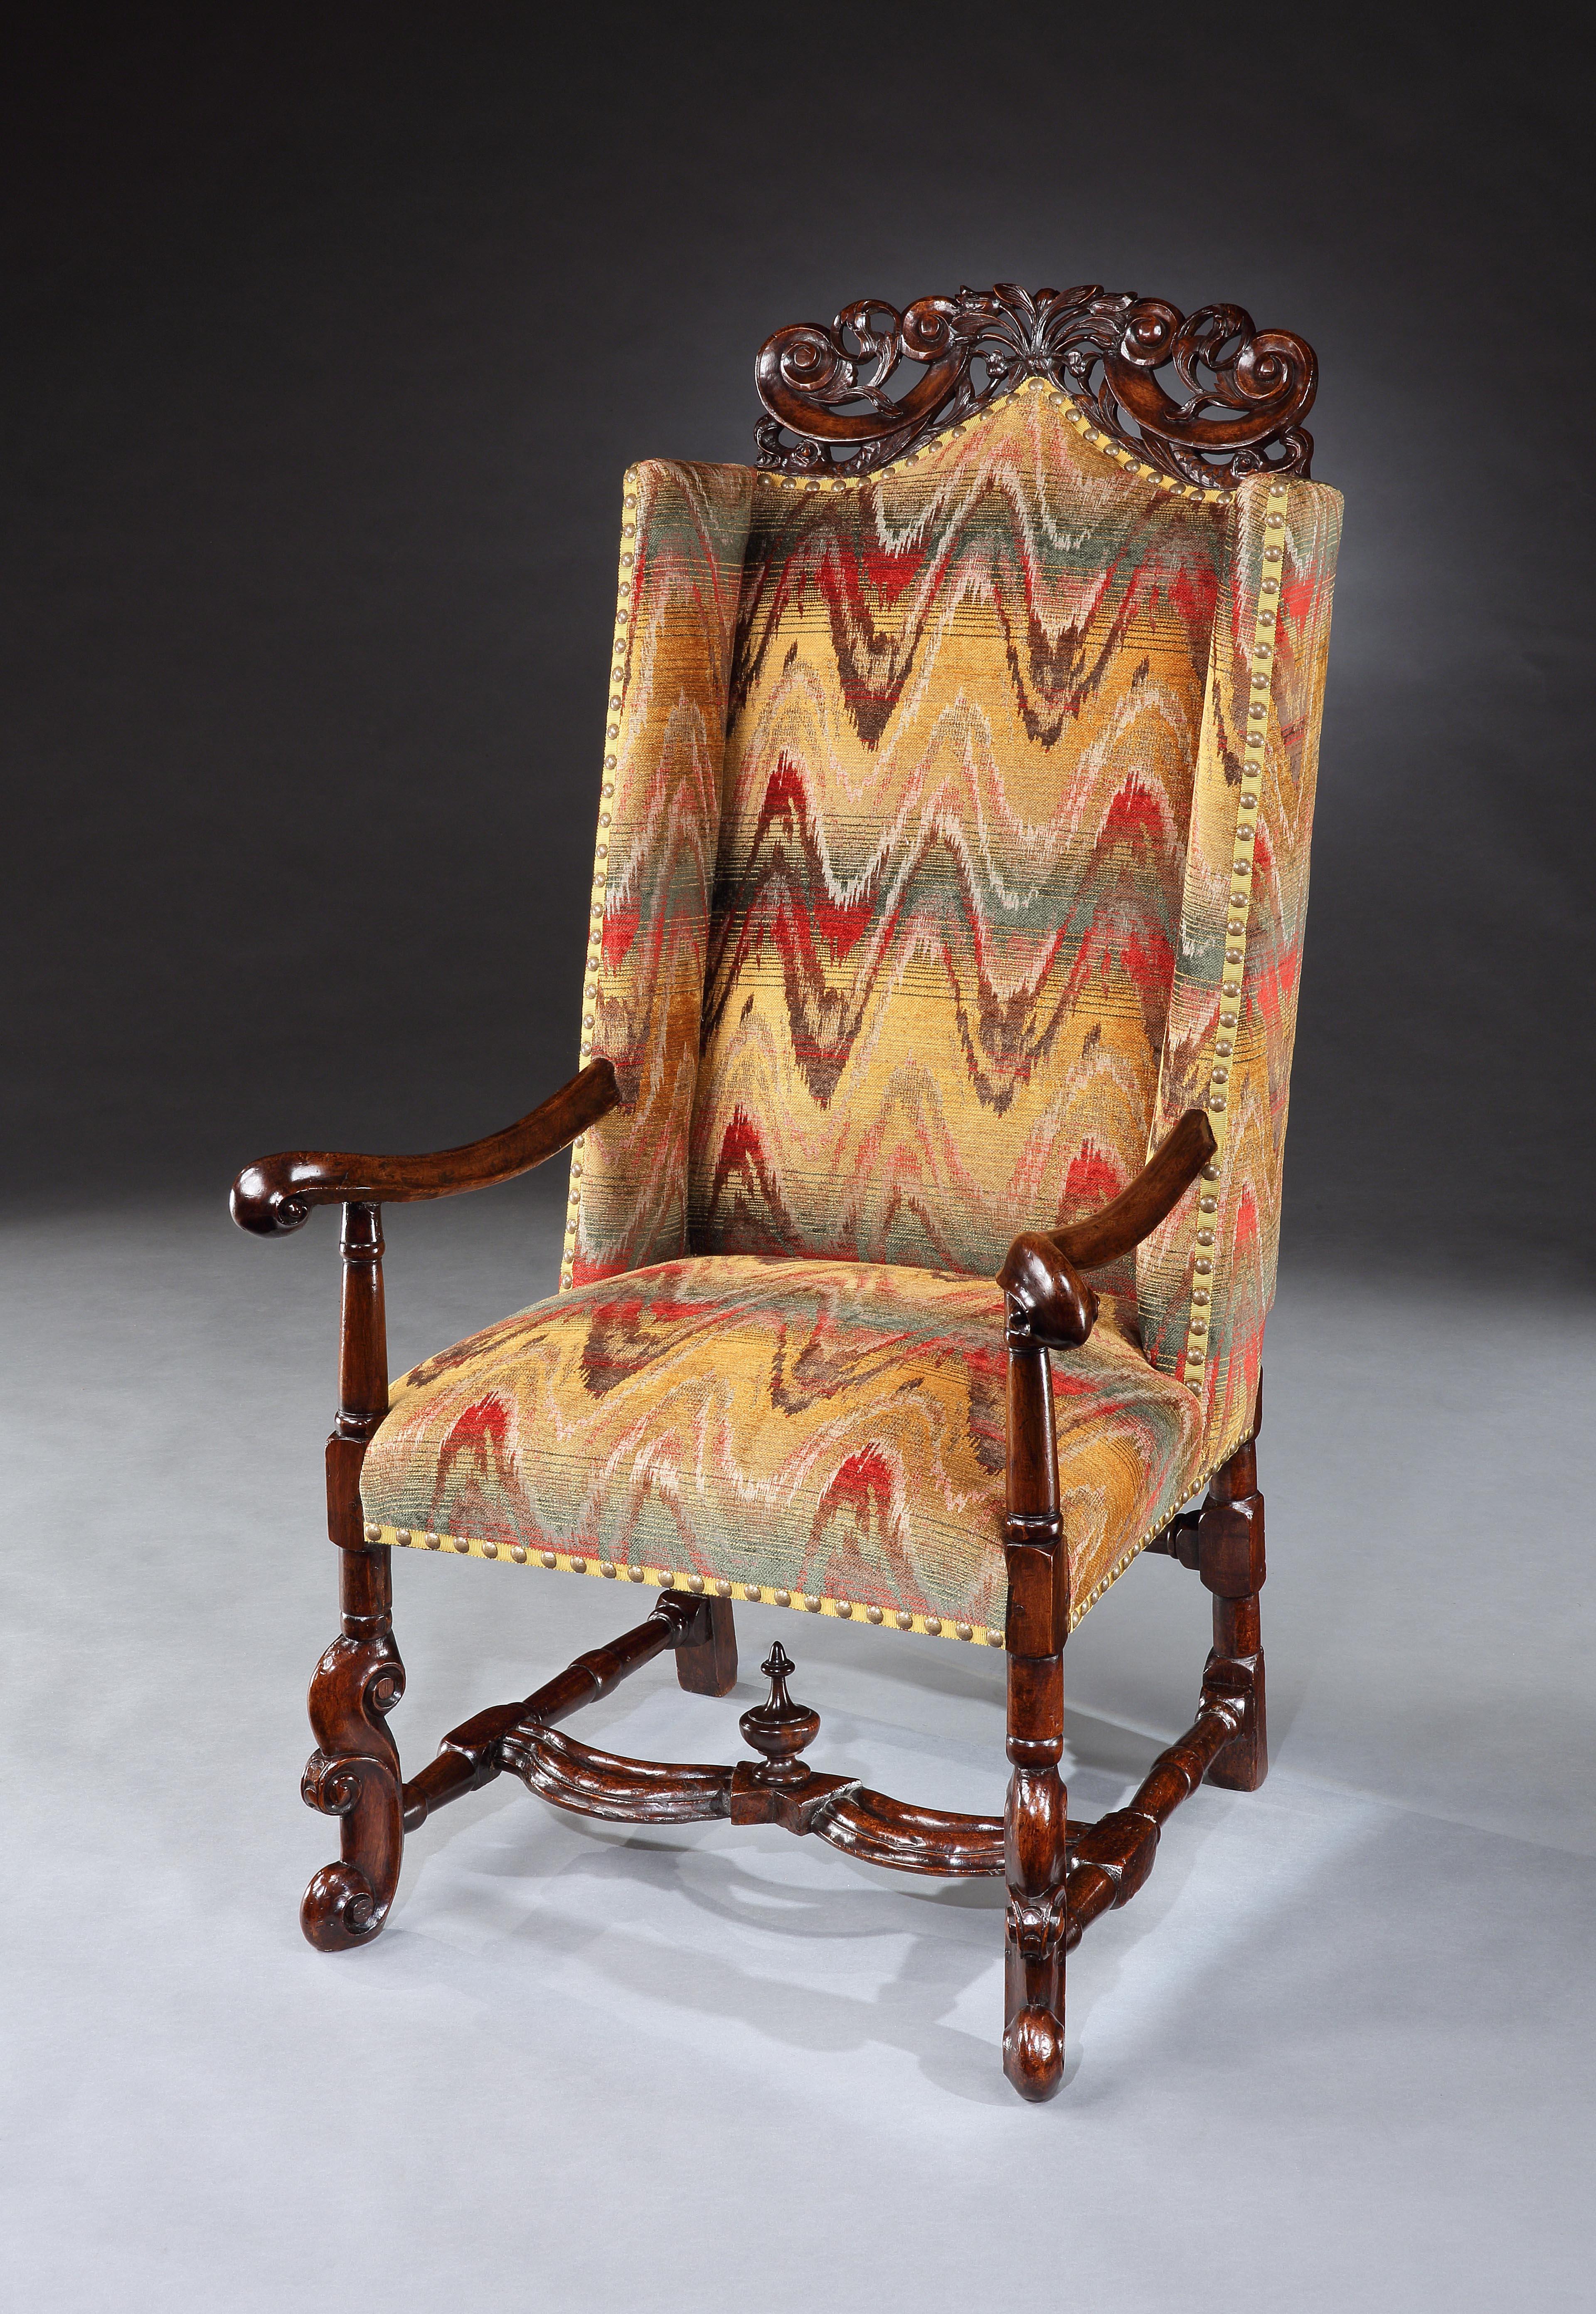 A museum quality, late-17th century, walnut, upholstered sleeping armchair

•	Exceptionally rare model; one of the first models of upholstered armchair with the addition of the wings intended to conceal draughts. 
•	Transitional form : many of the